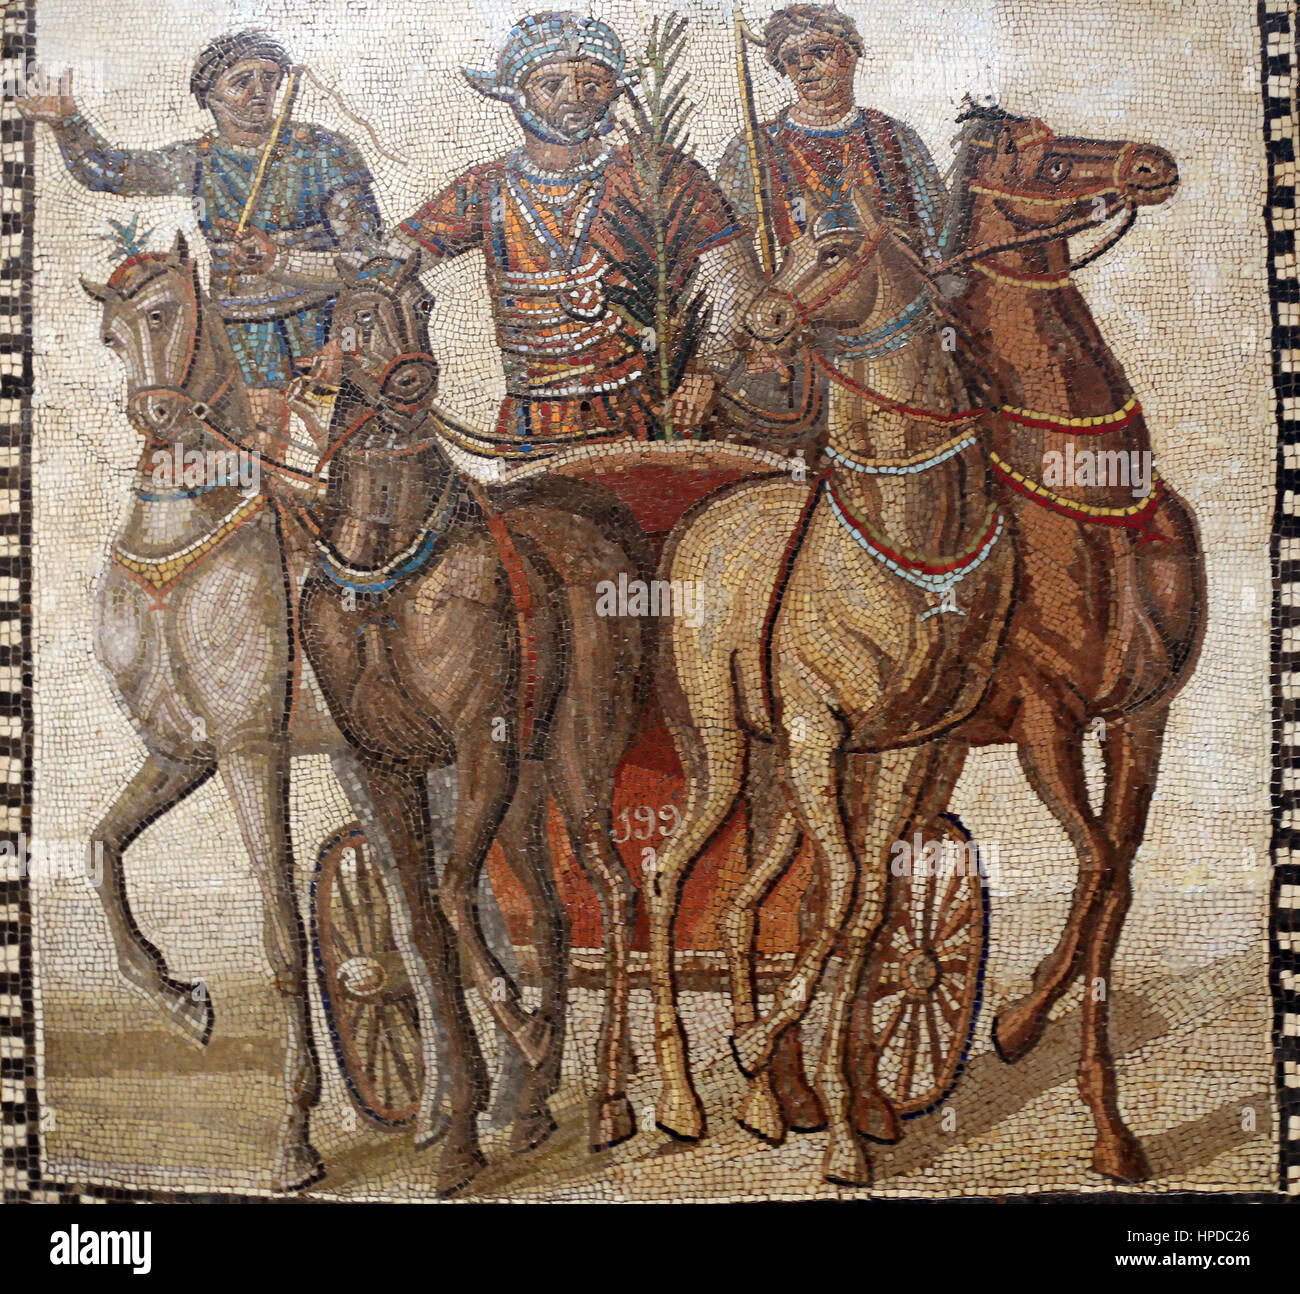 Quadriga of the factio russata. Mosaic. Limestone. 3rd century. Rome. The red team's driver, winner of the race, has taken the palm frond of victory.  Stock Photo